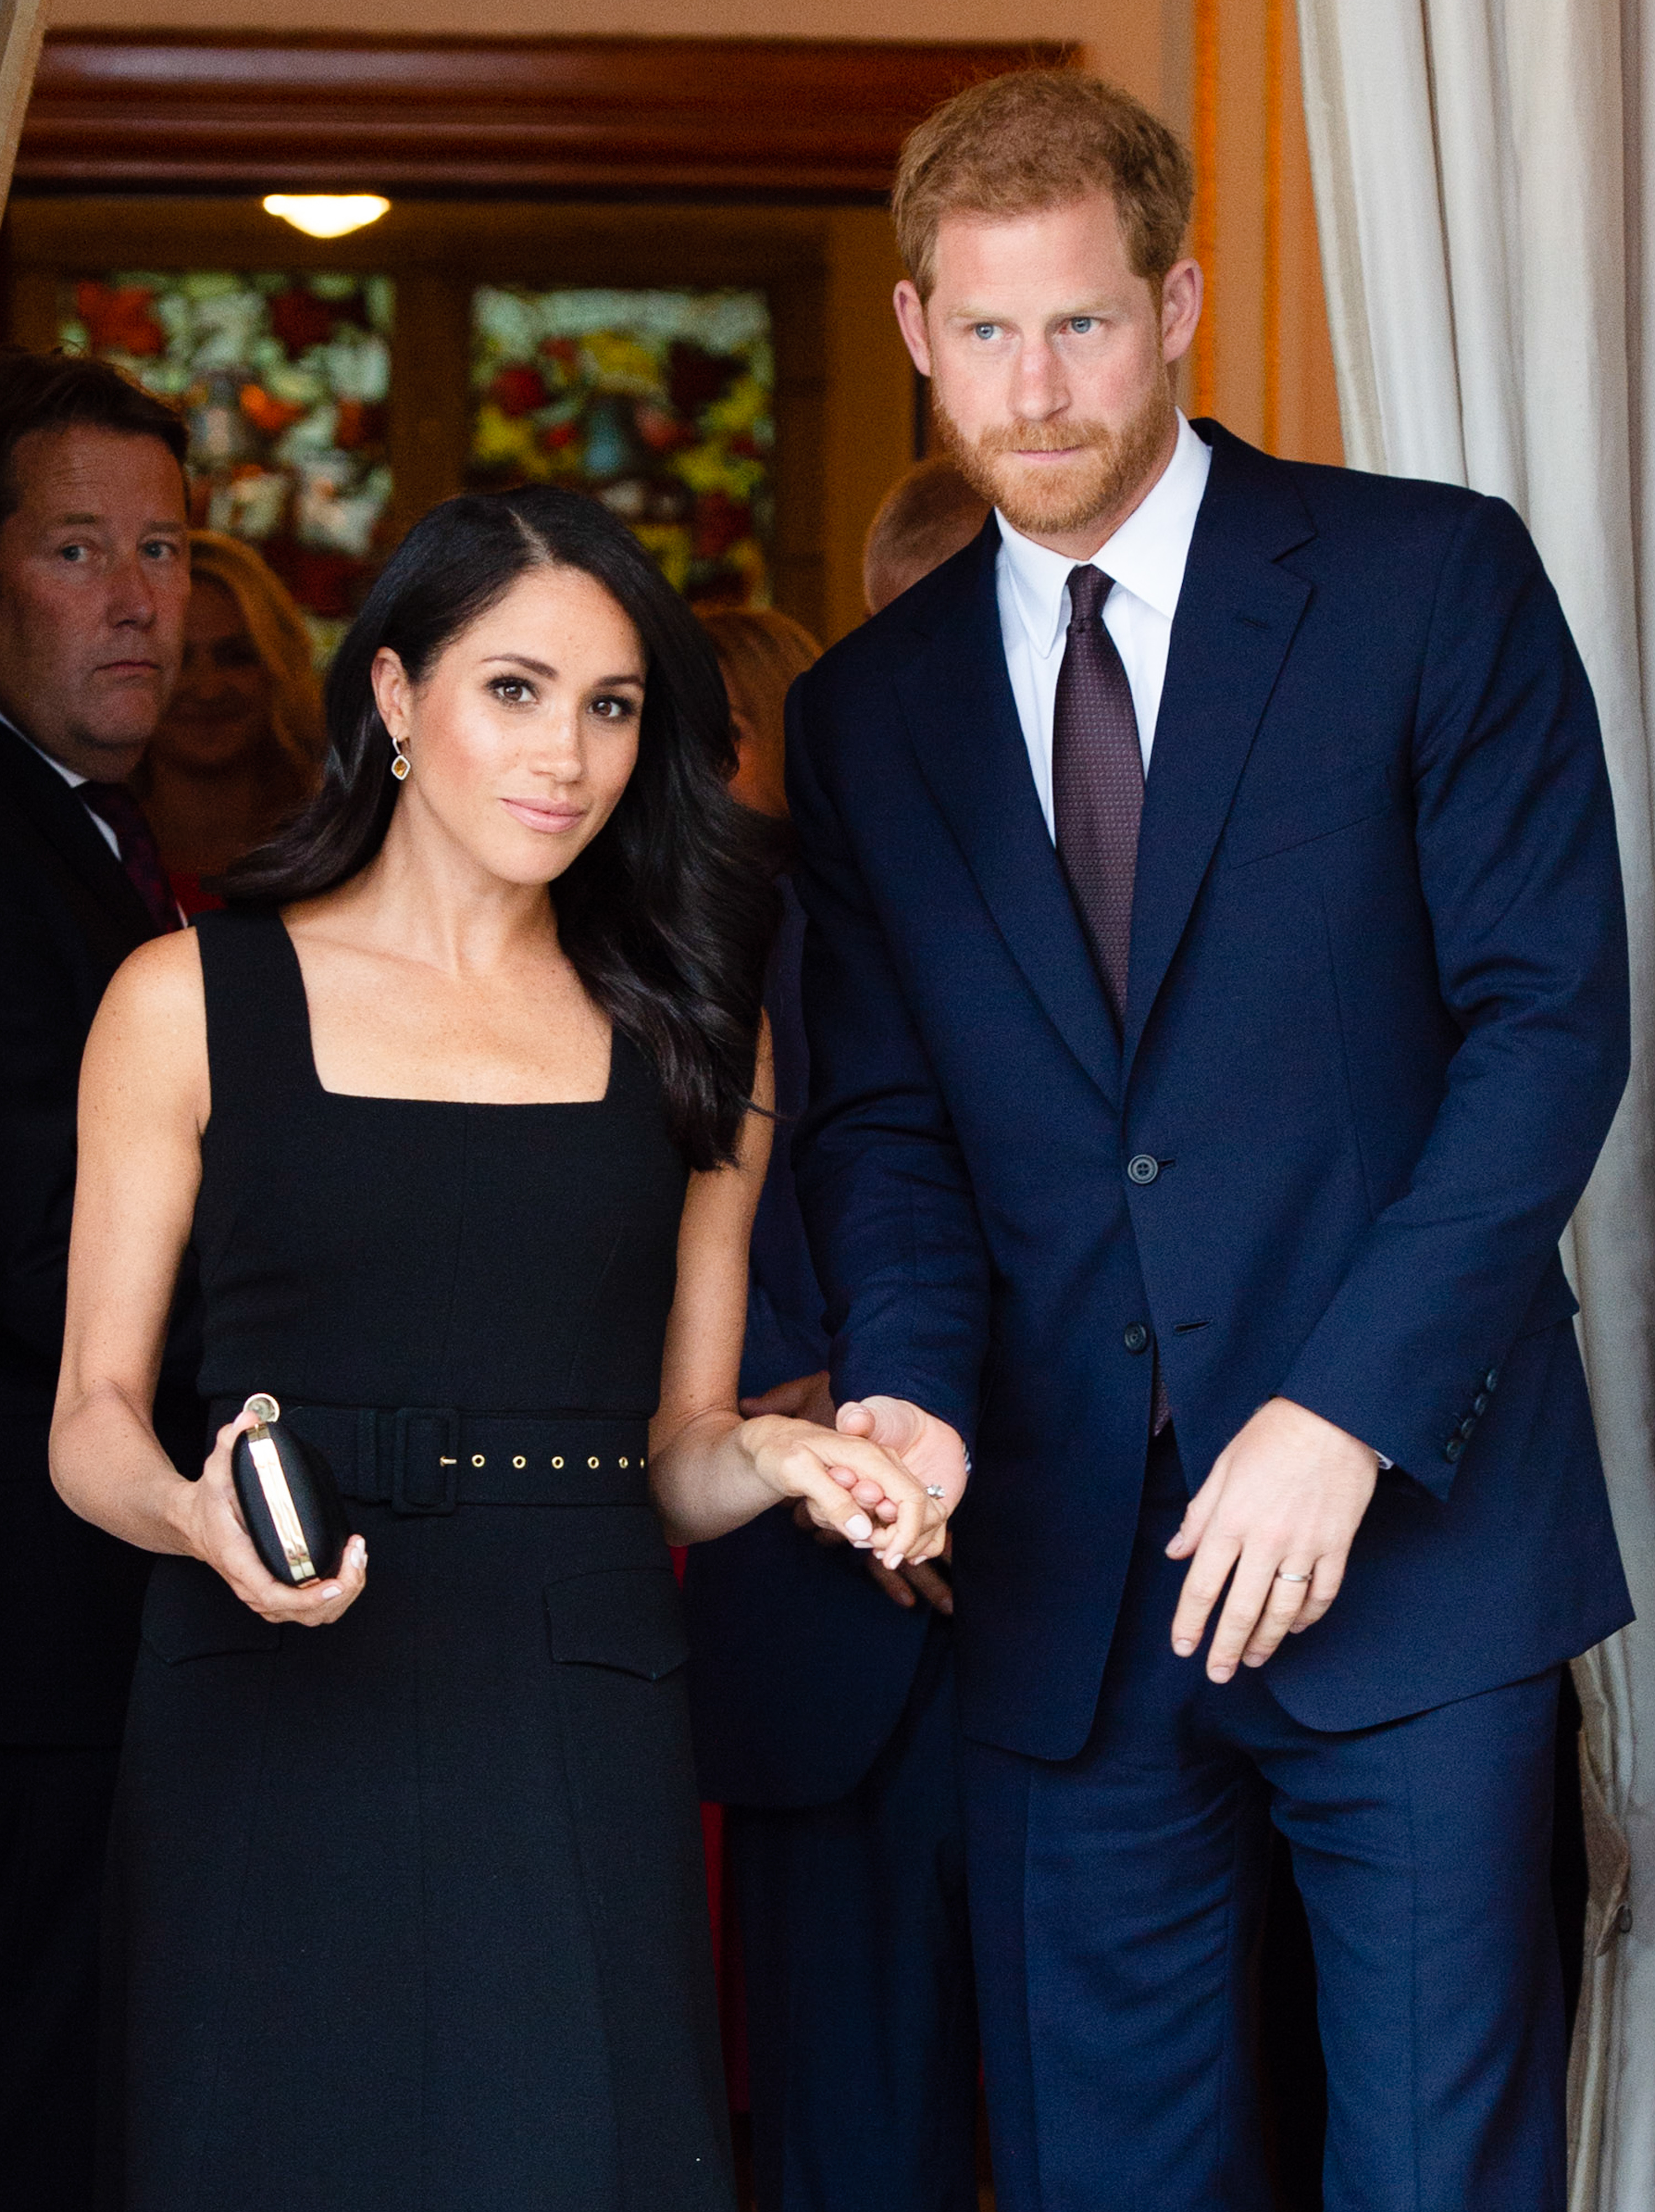 Prince Harry and Meghan Markle photographed attending a formal engagement at the British Ambassador's residence